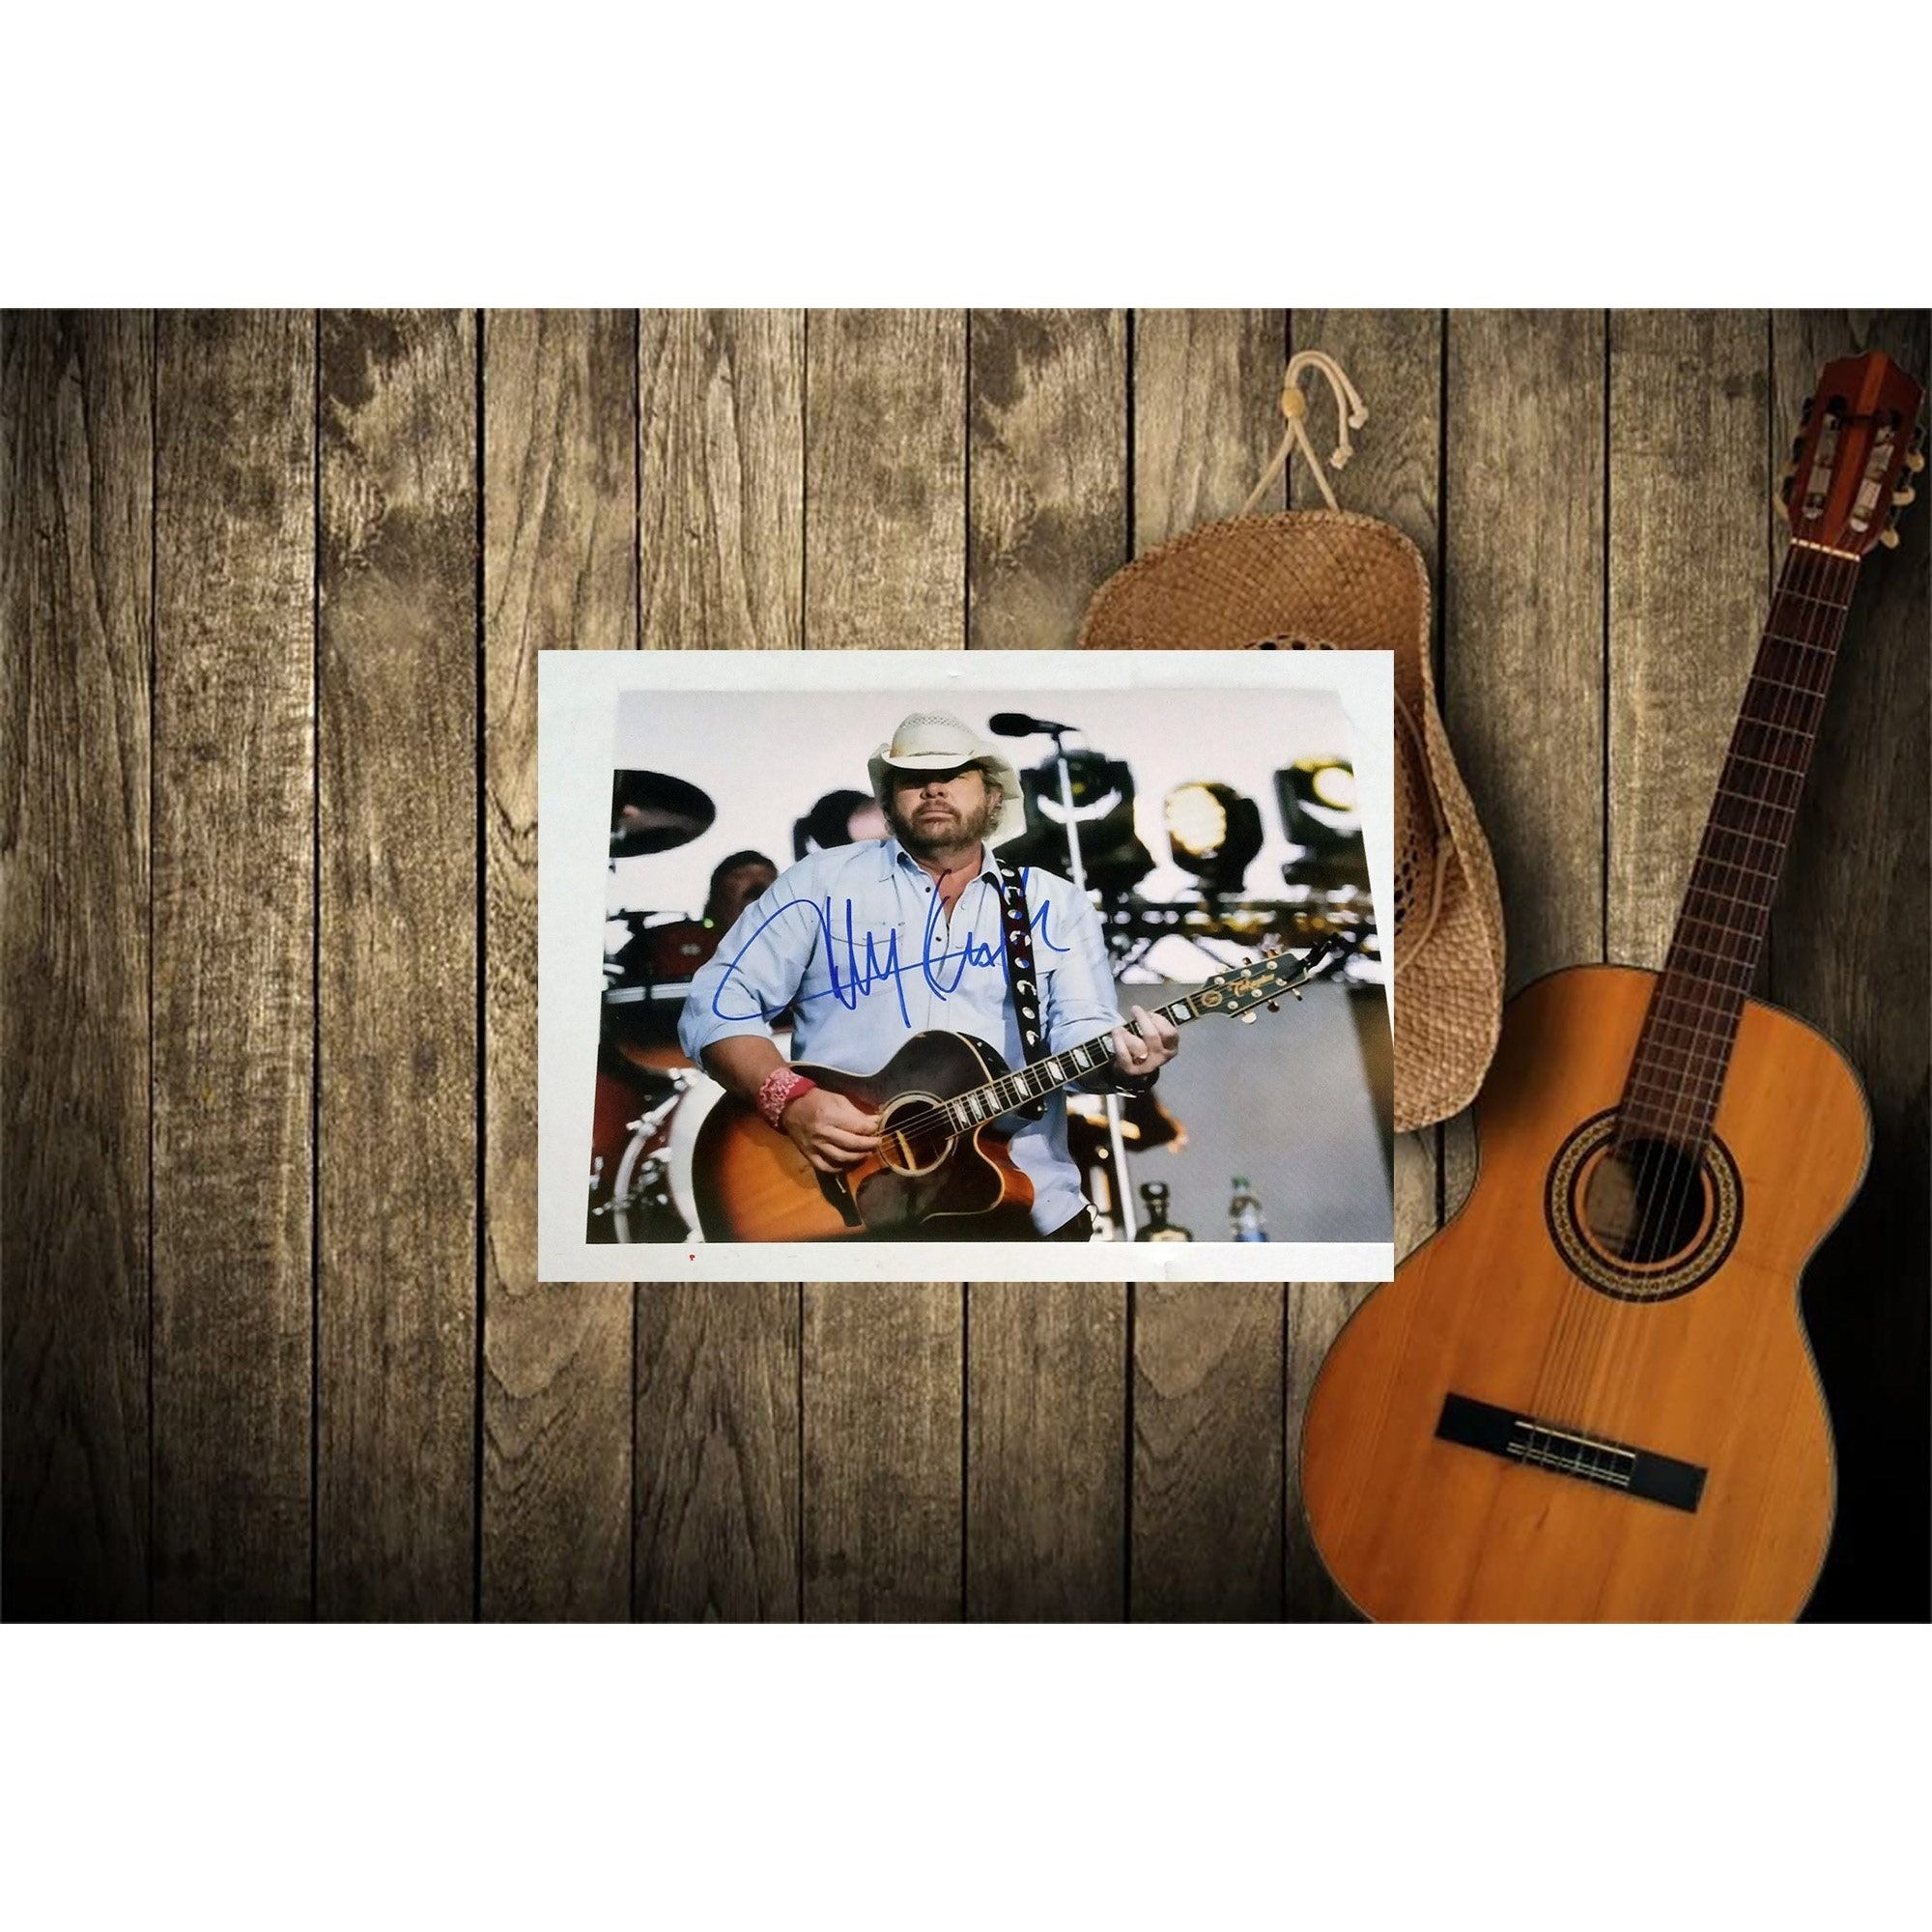 Toby Keith 8 by 10 signed photo with proof